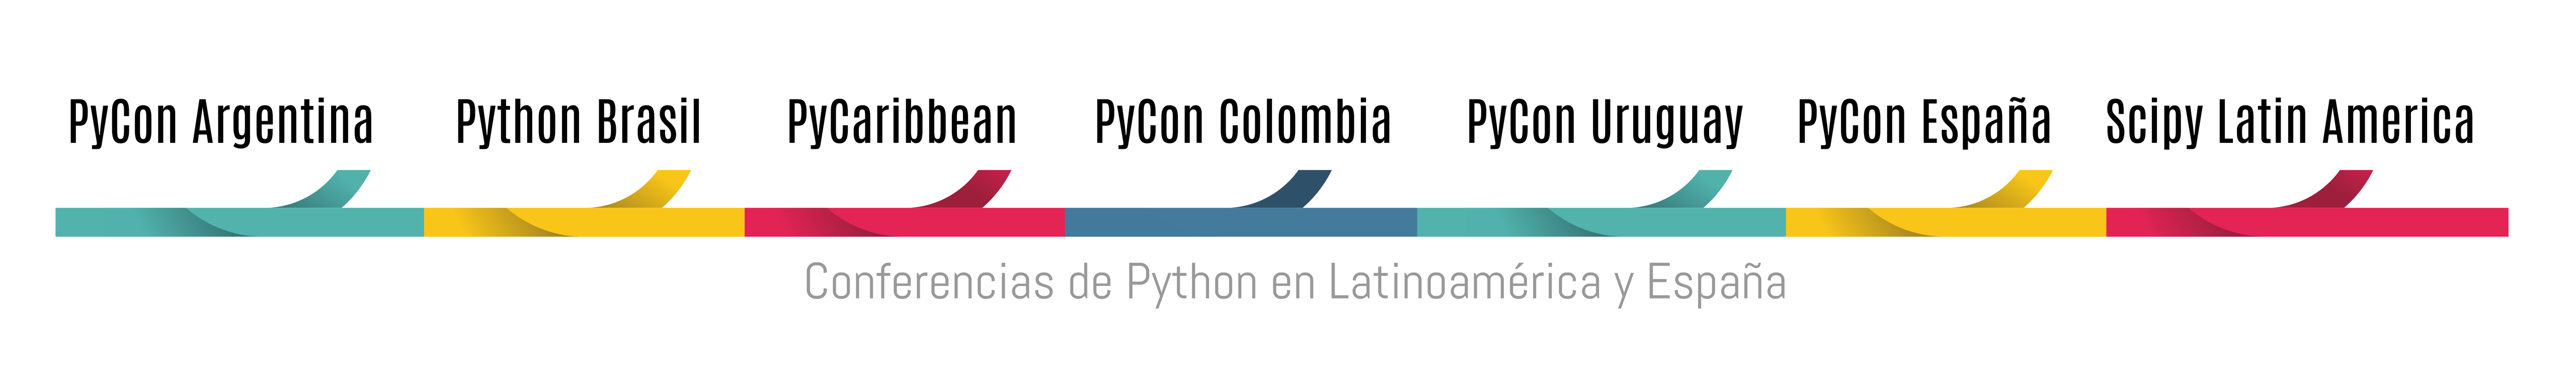 timeline-pycon.png